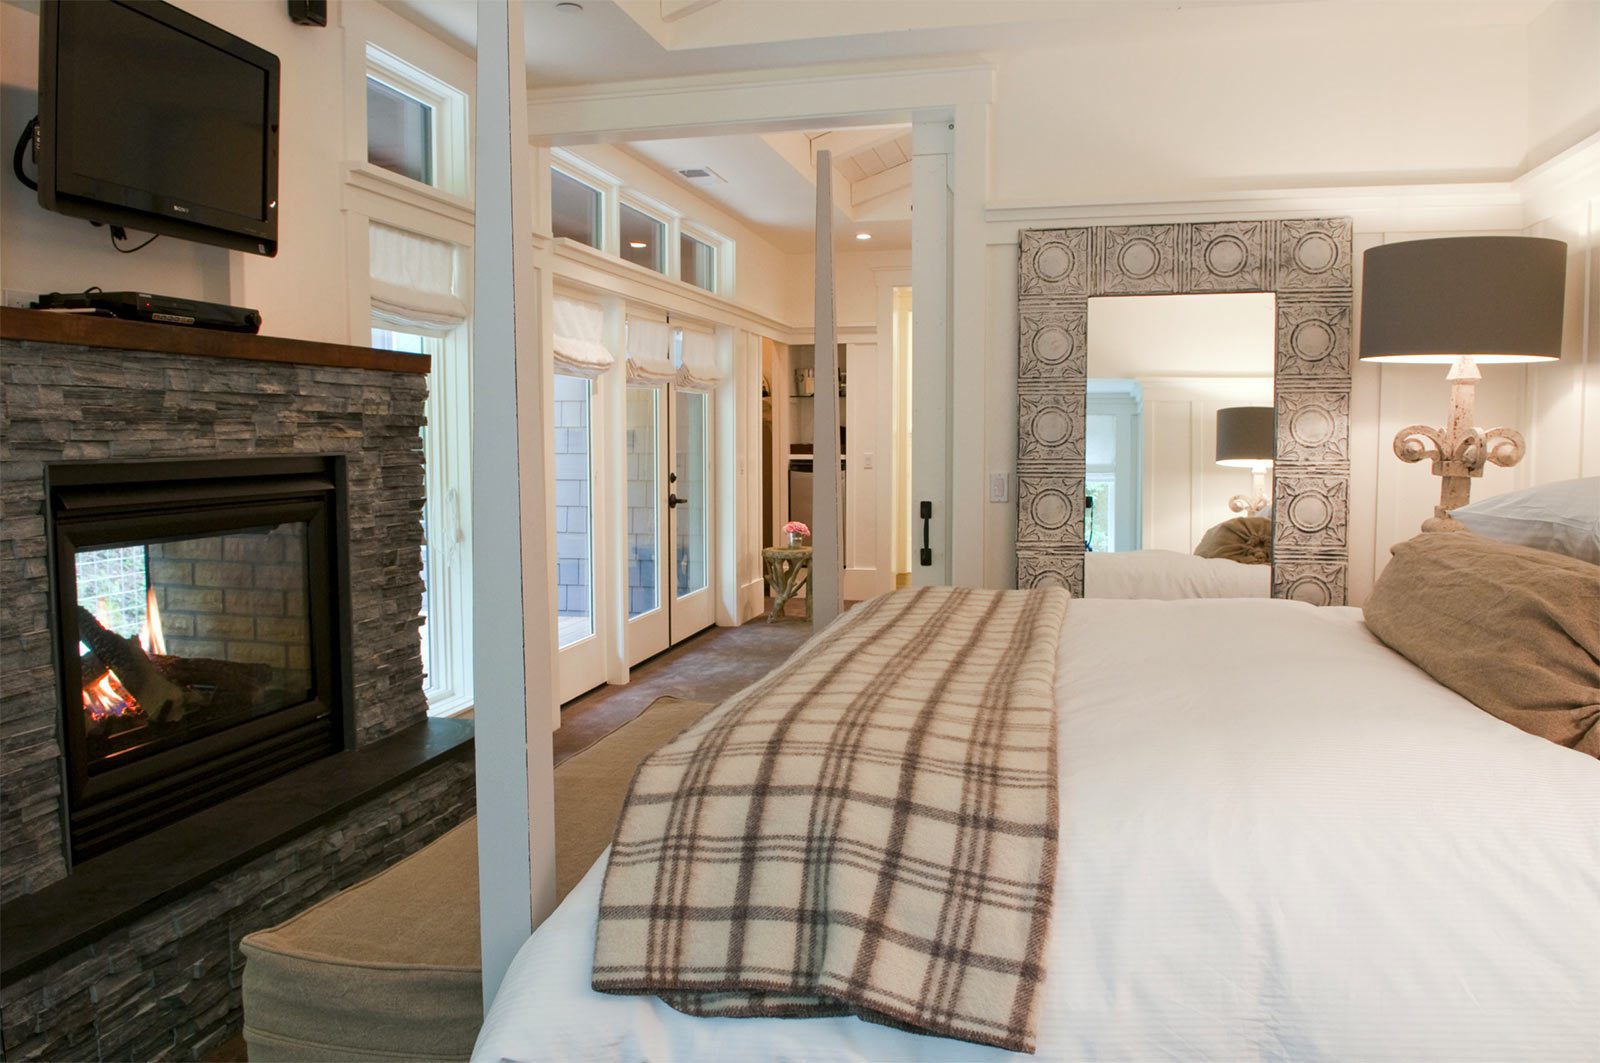 Interior of Barn One Bedroom Suite: side view of large bed with white bedding and plaid folded blanket at foot of bed. On the left is a dark stone gas fireplace with flatscreen TV over it. There are large floor to ceiling windows on the wall.